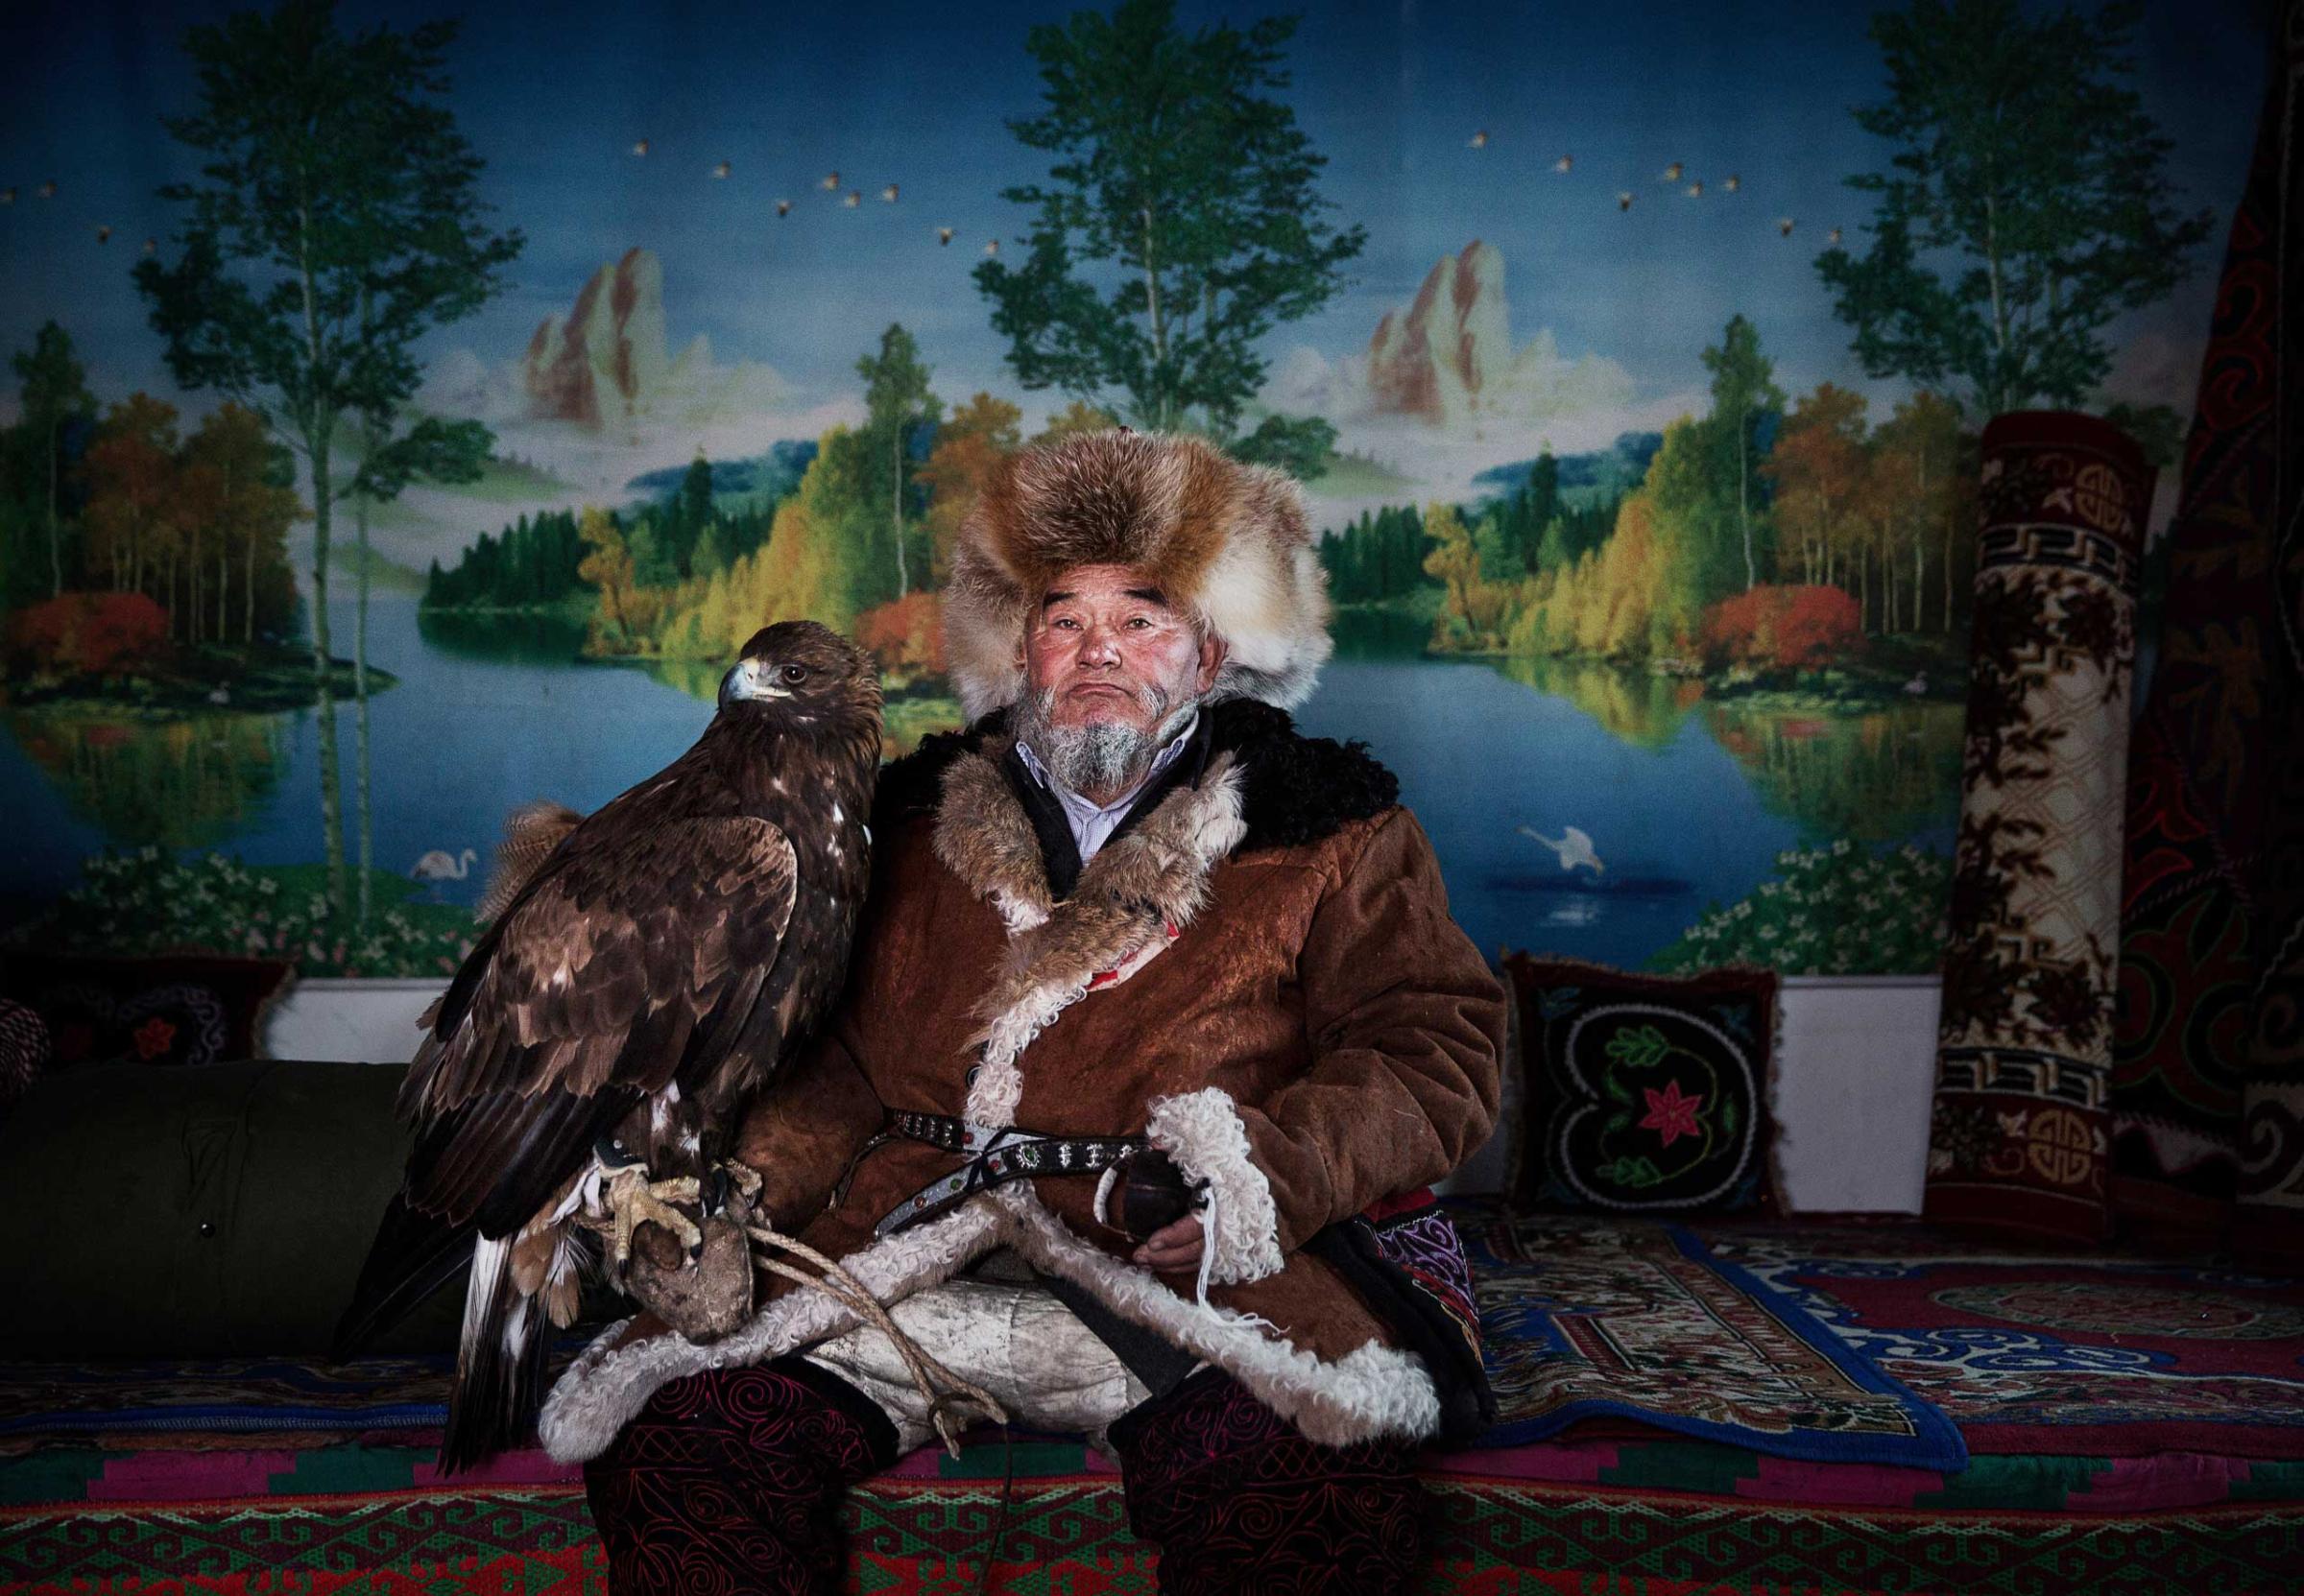 Chinese Kazakh eagle hunter Margars Mazkin, 74 years, sits with his eagle before leaving for competition on Jan. 31, 2015 in the mountains of Qinghe County, Xinjiang, northwestern China.